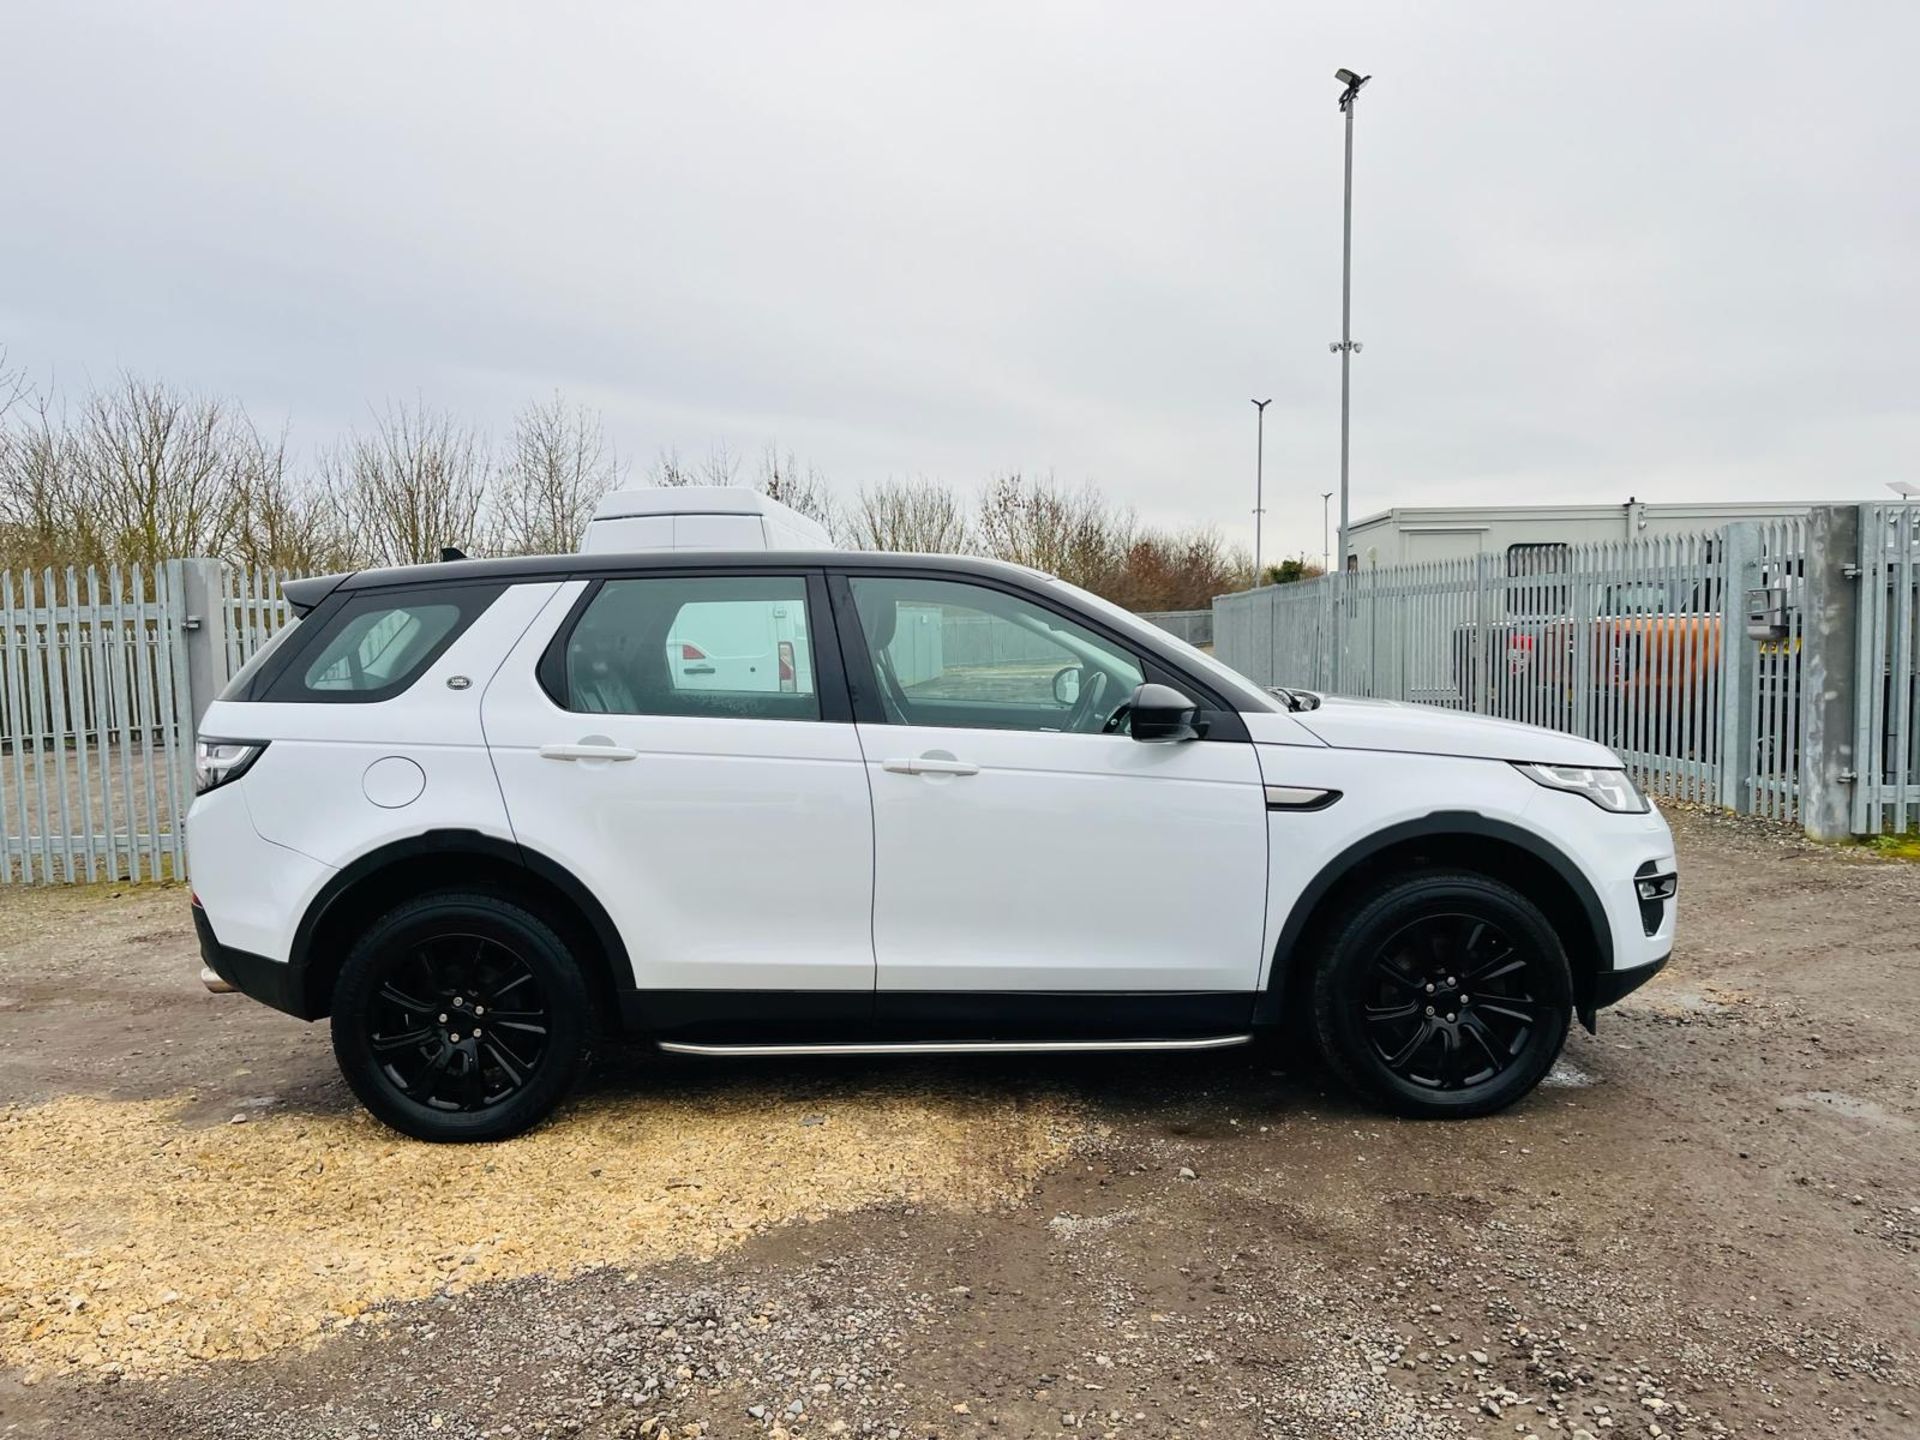 ** ON SALE ** Land Rover Discovery Sport 2.0 SE TD4 180 Automatic -2016'16 Reg' -ULEZ Compliant - Image 12 of 35